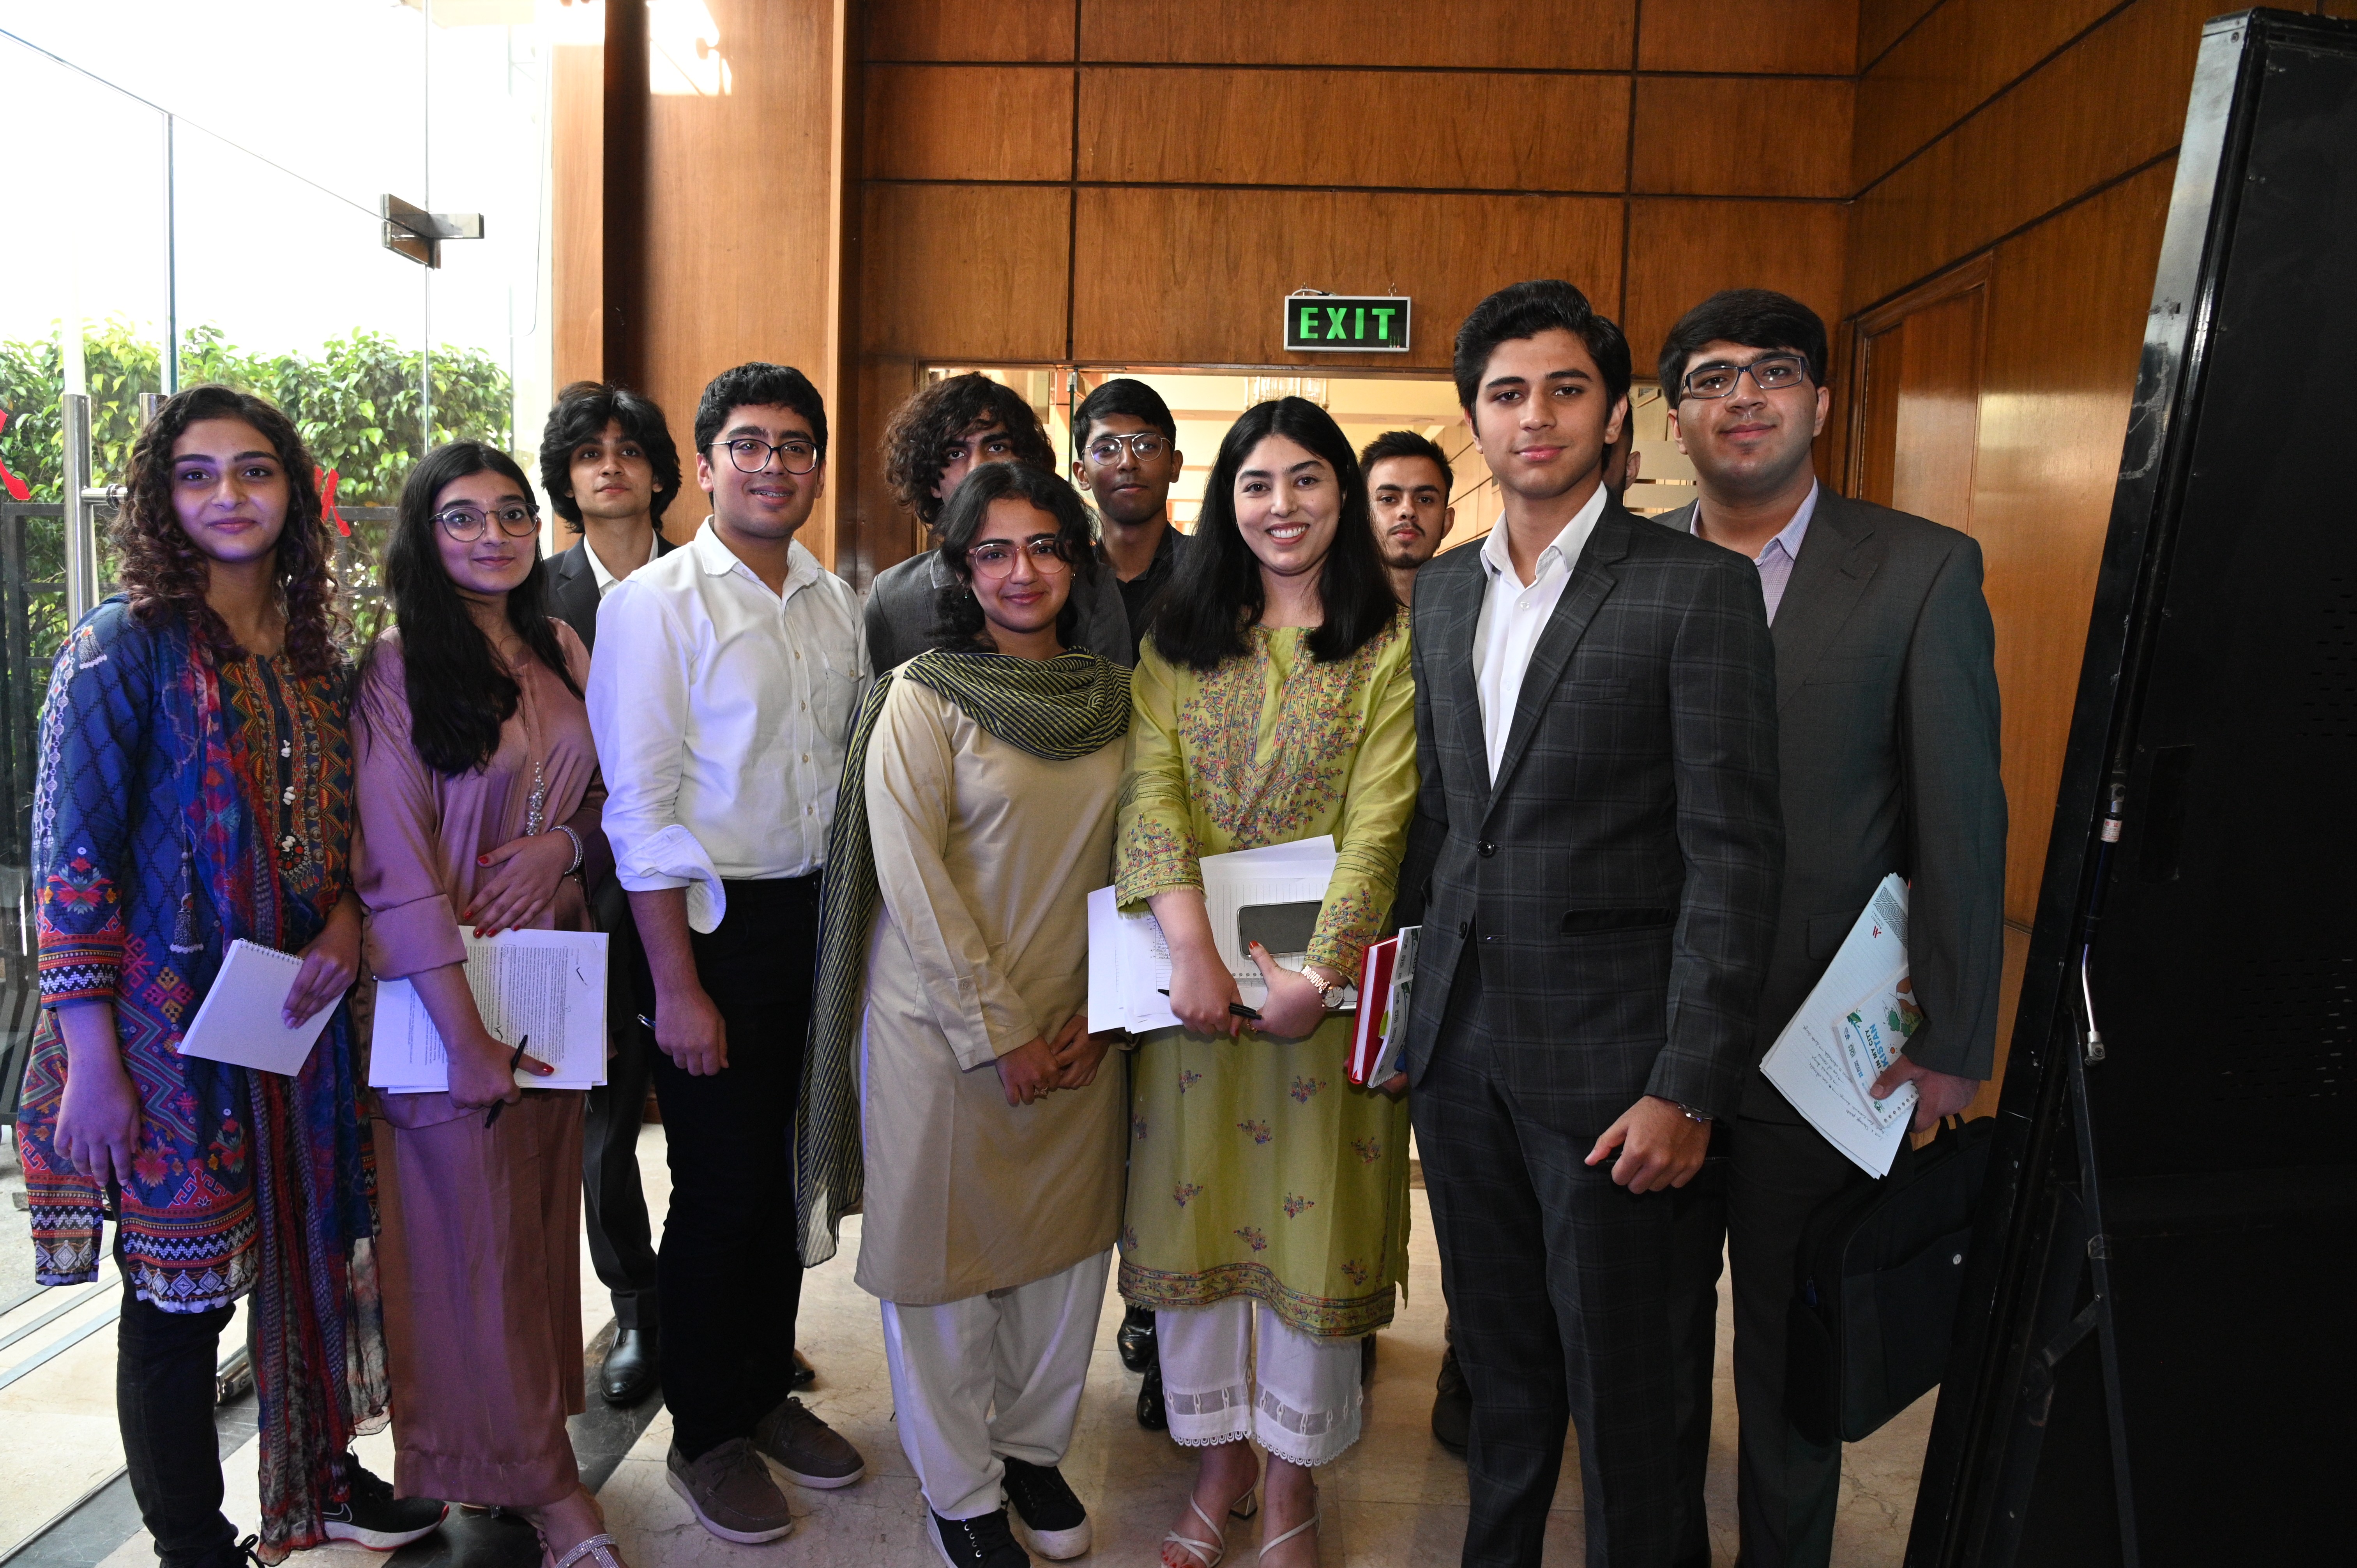 A group photo of students